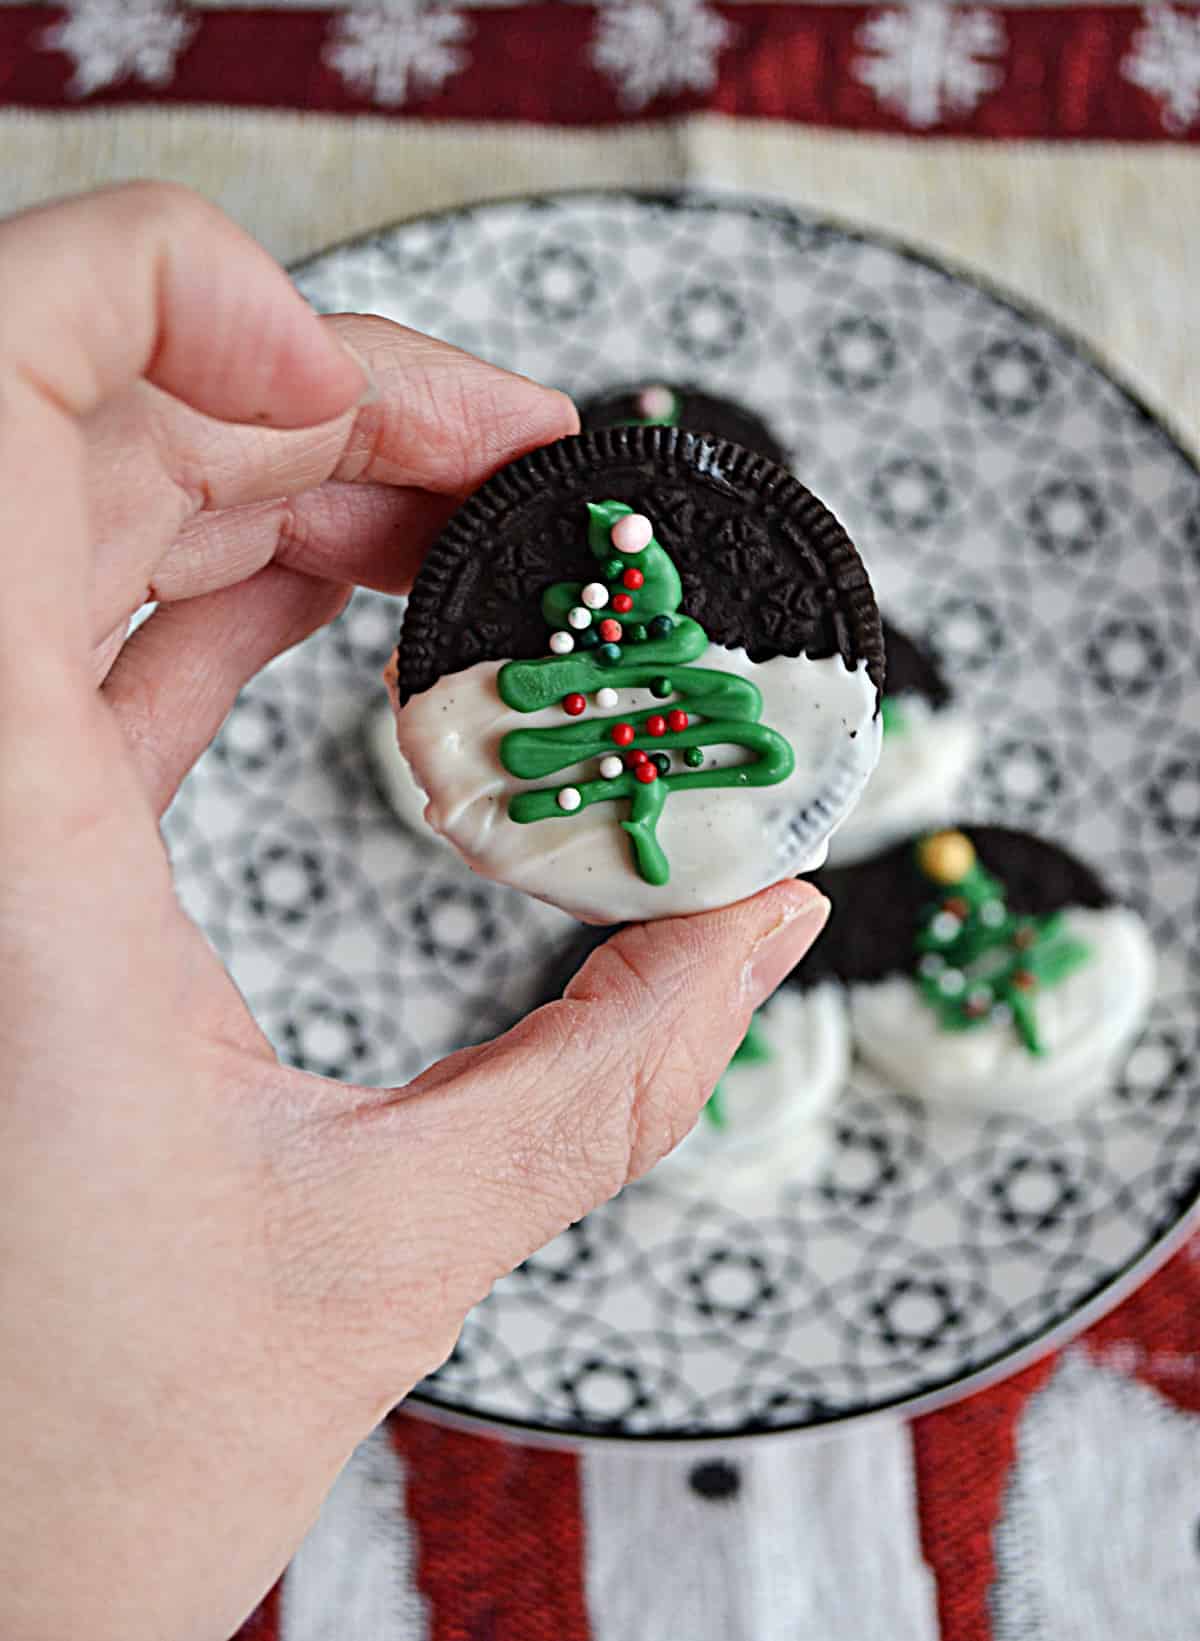 A close up of an Oreo with a Christmas tree on it.